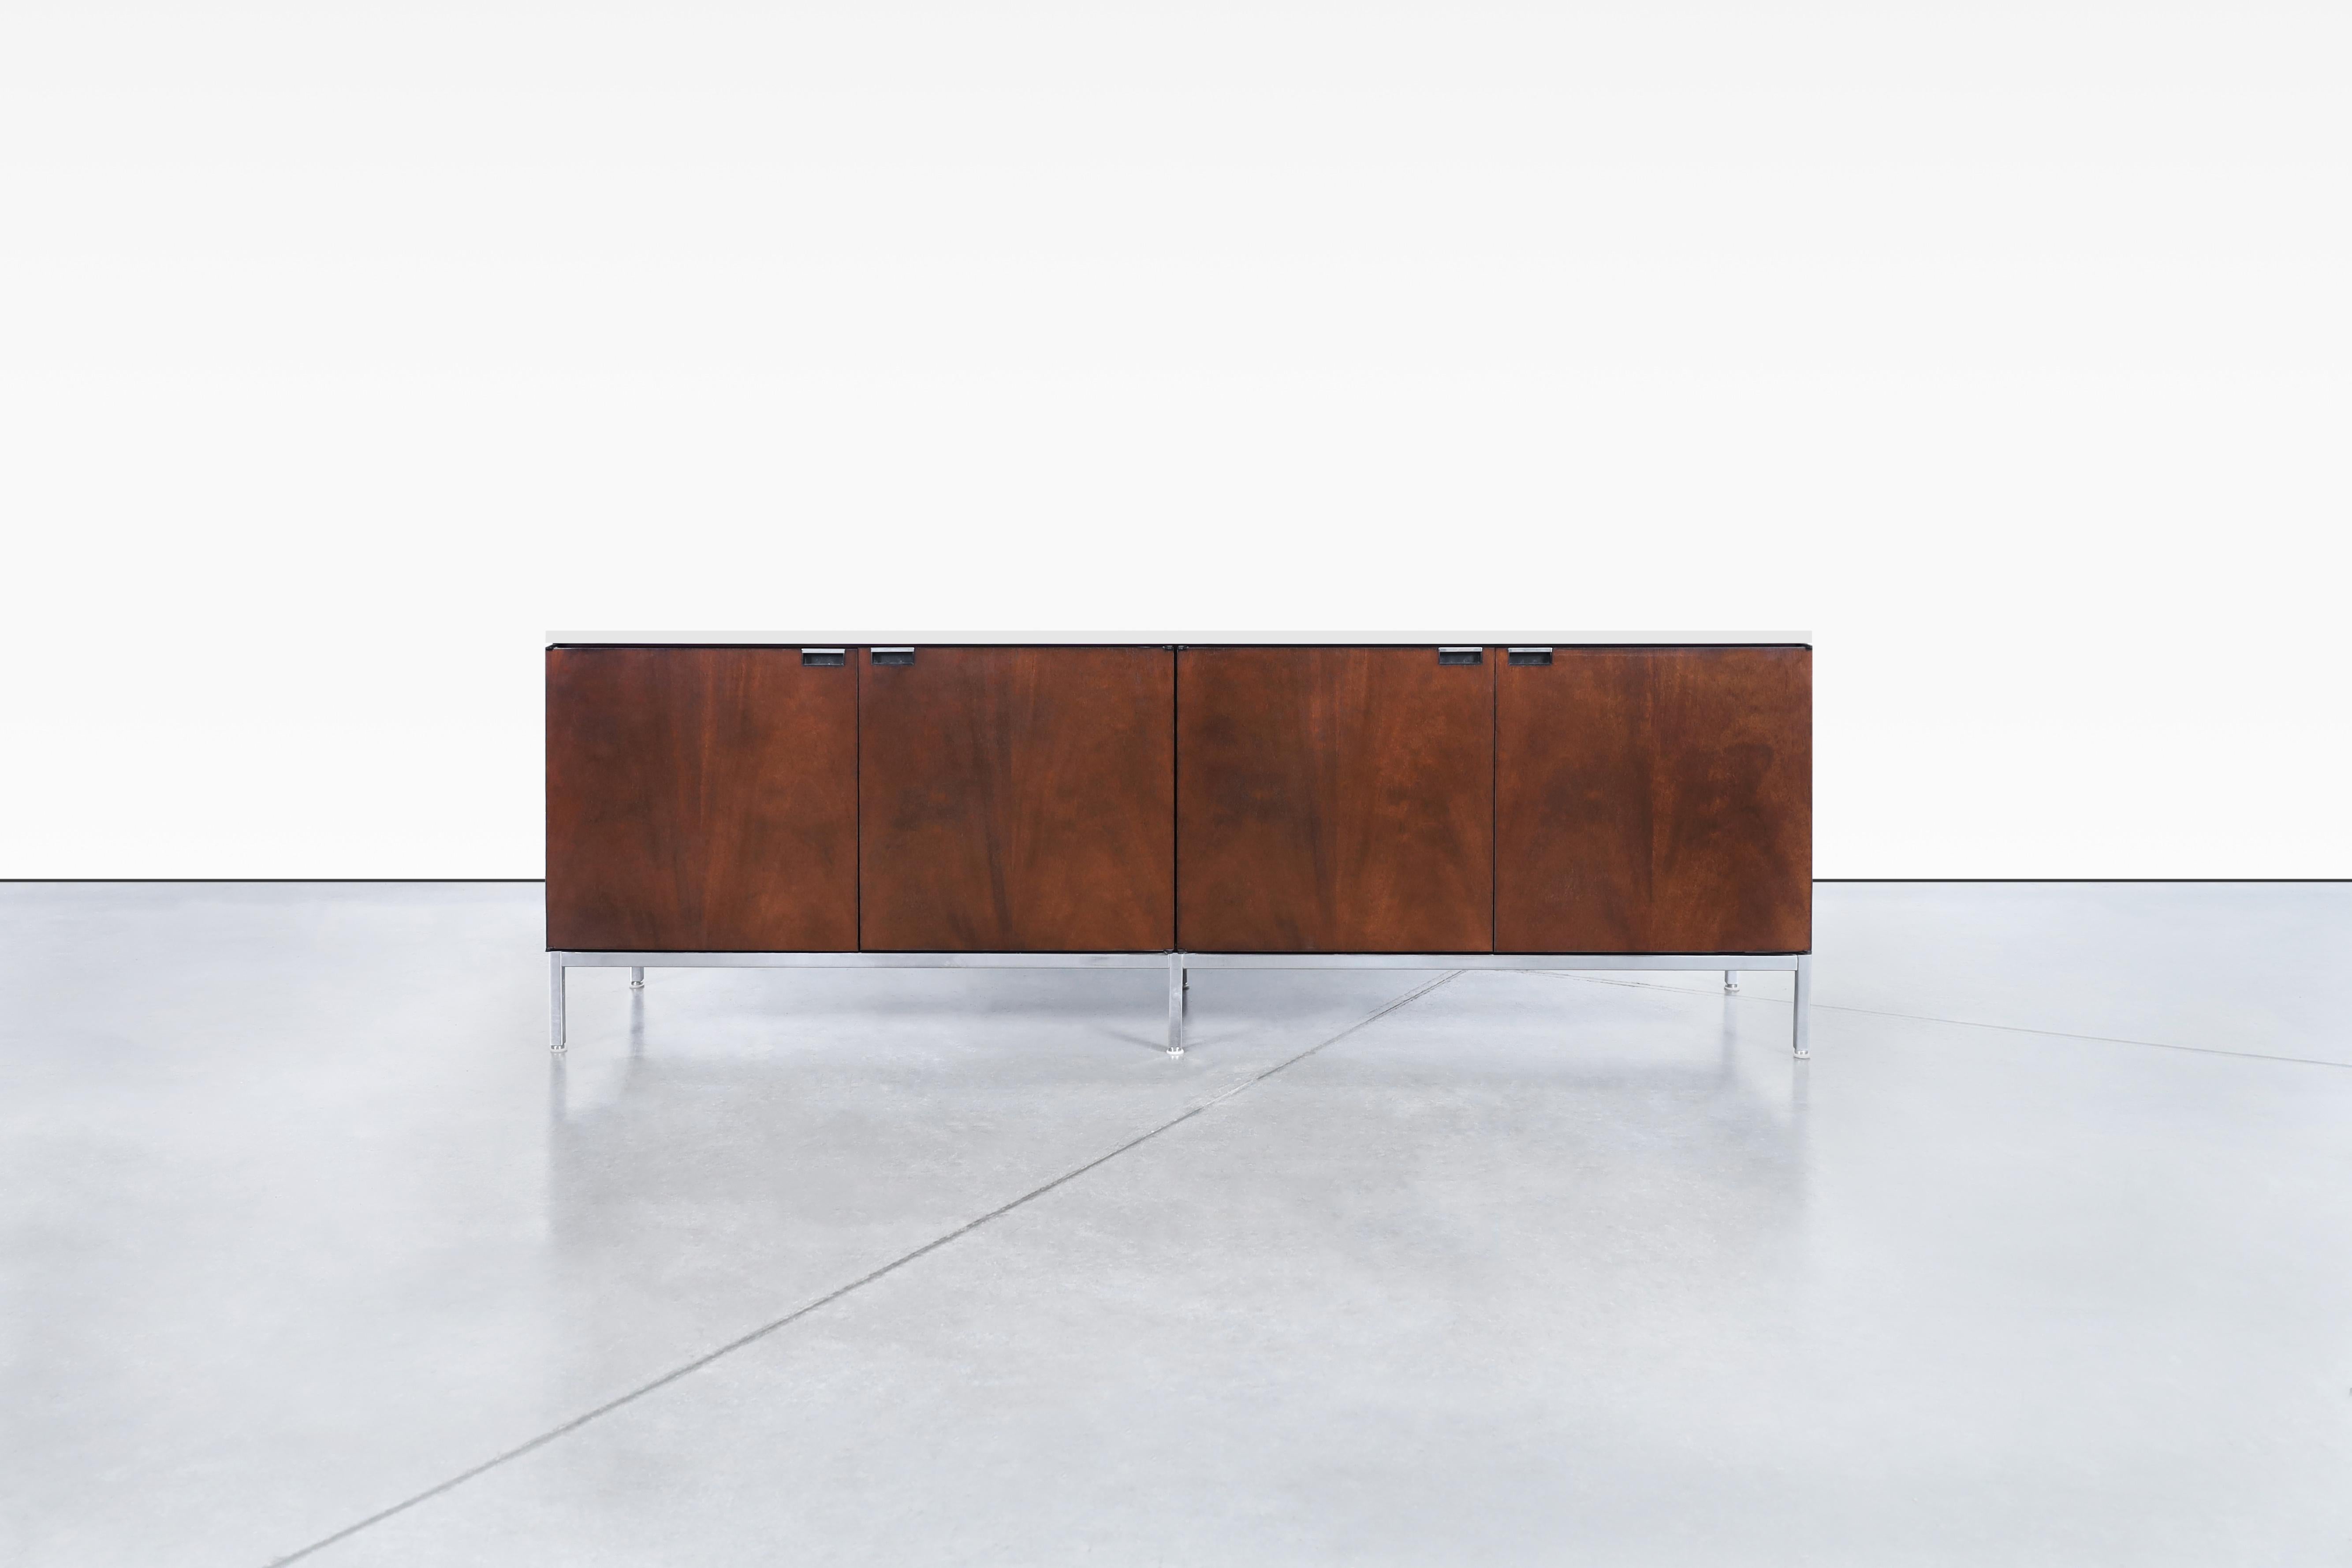 This beautiful credenza designed by Florence Knoll is not only stylish and functional, but it also comes engraved with the designer's name, making it a true collector's item. The warm mahogany tone cabinet complements the Carrara marble beautifully